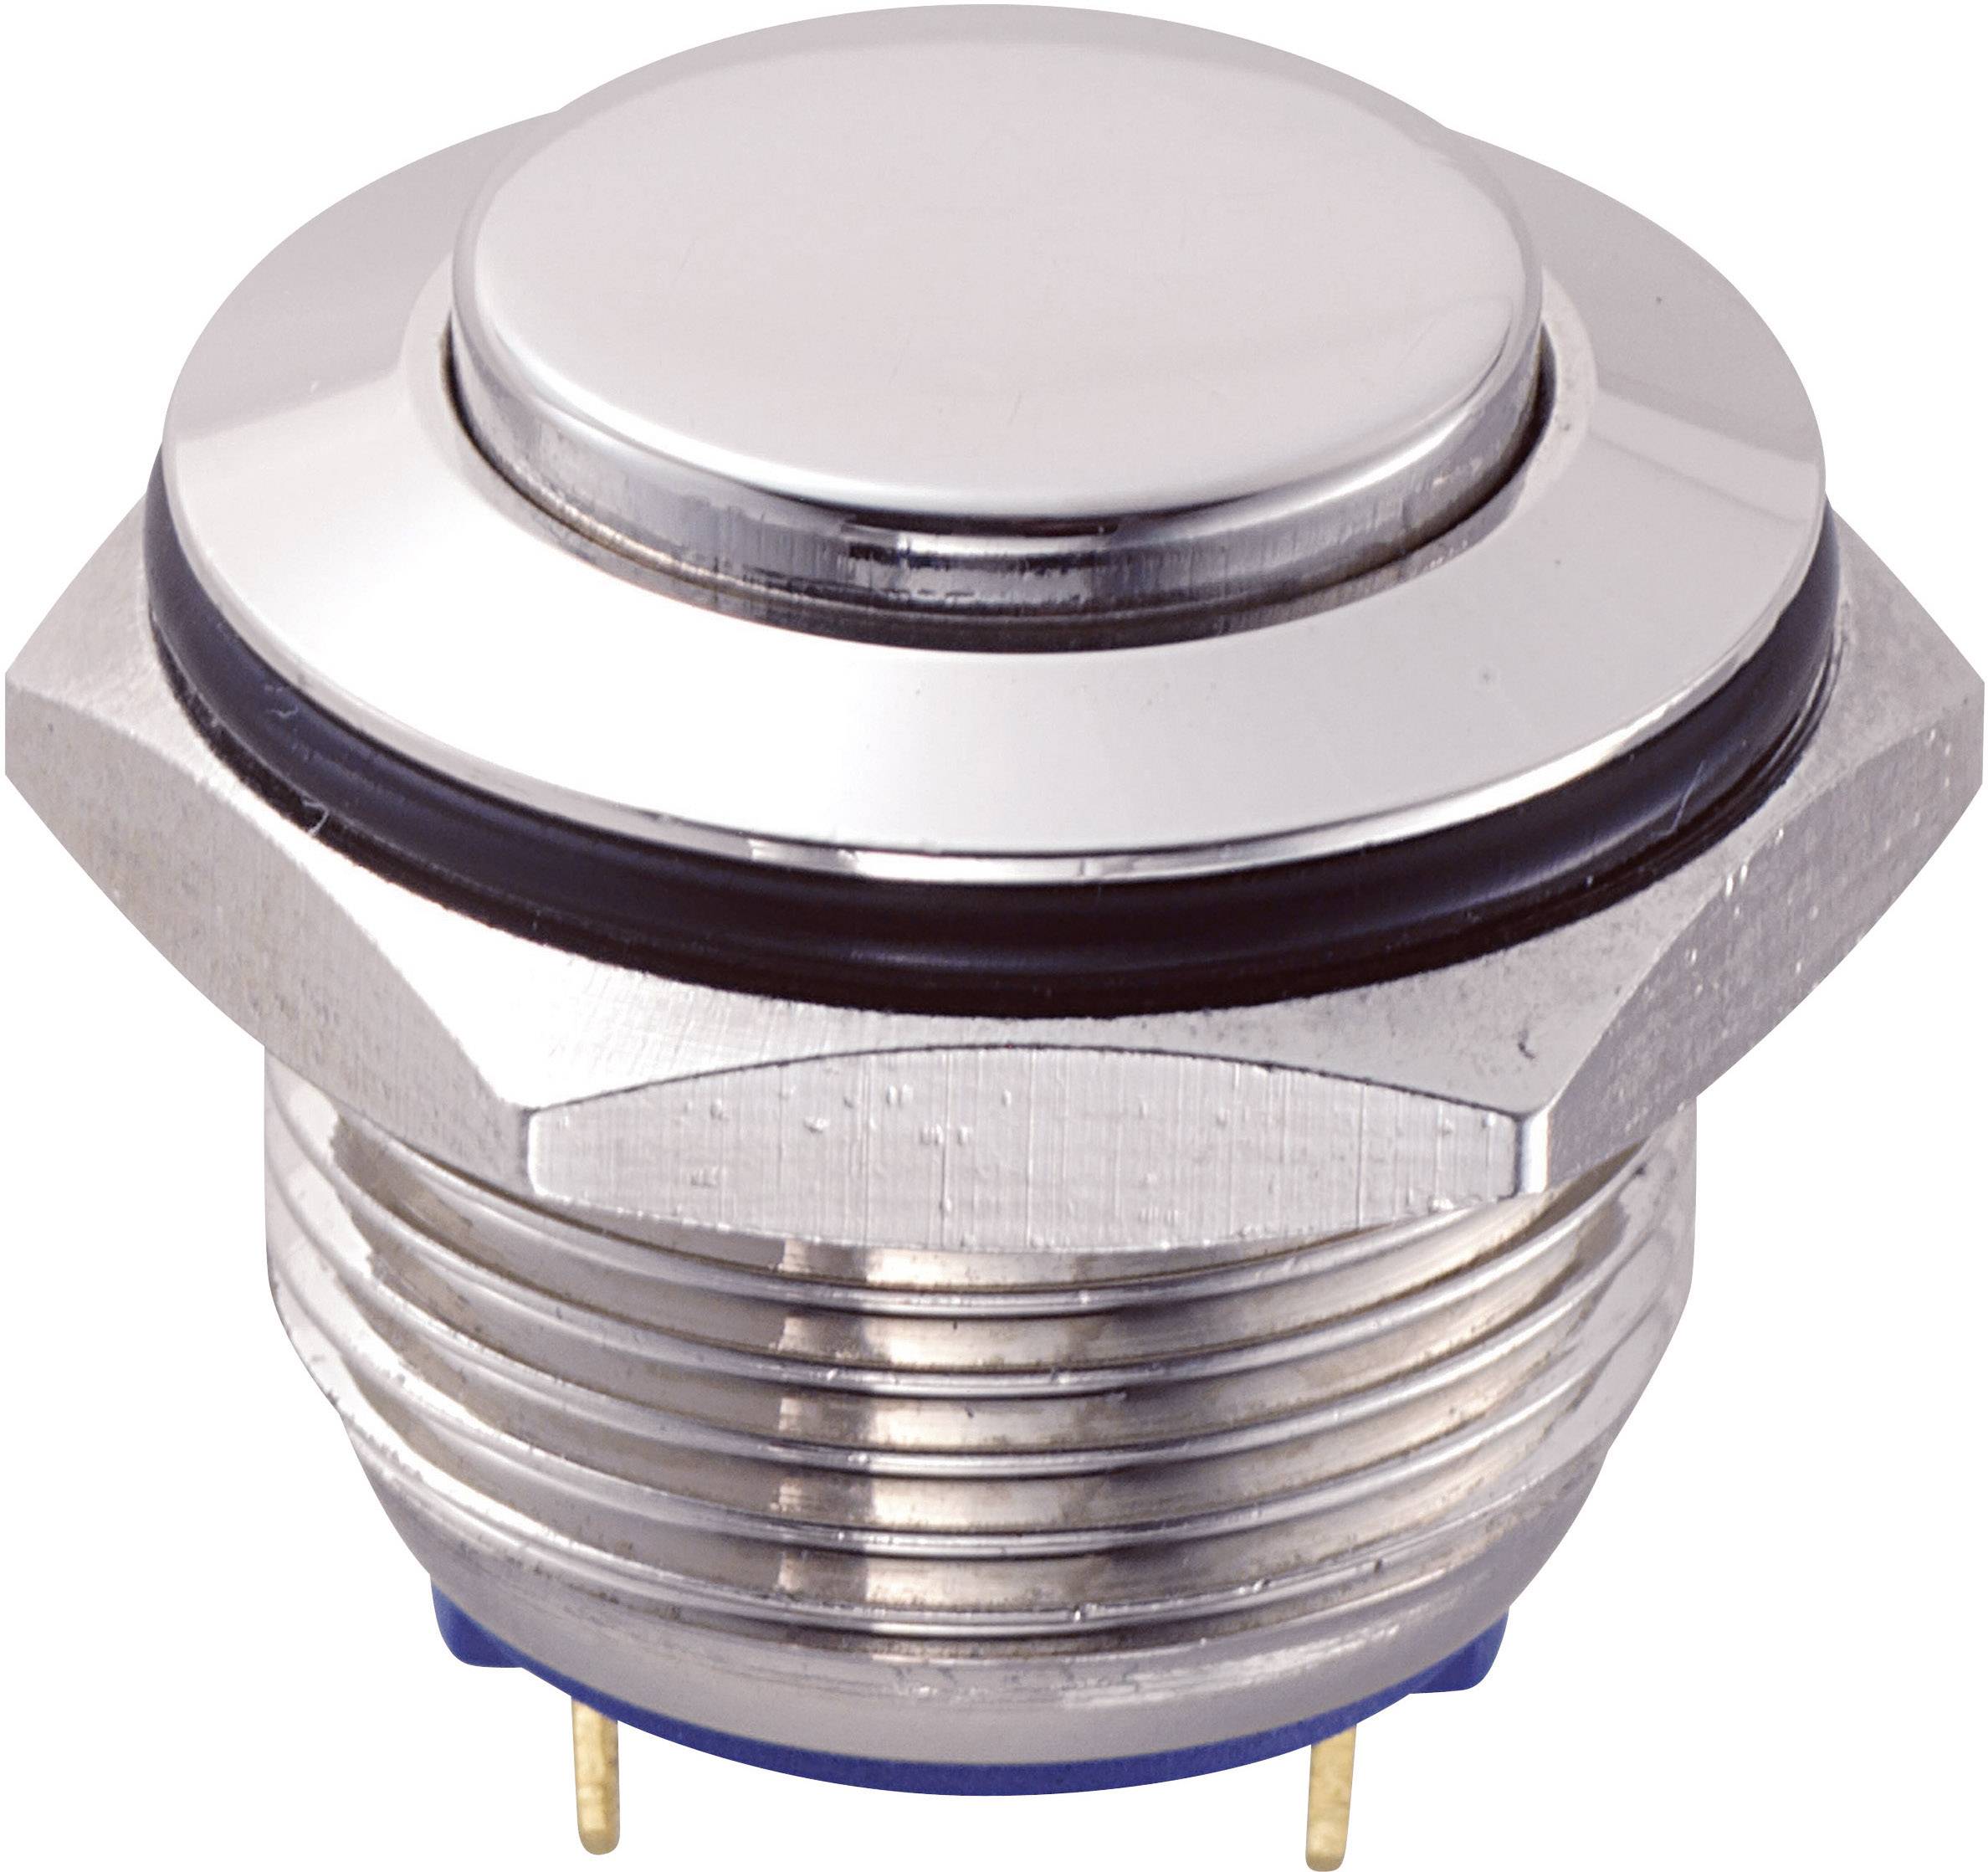 Tru Components Gq16h 10 J N Tamper Proof Pushbutton 48 V Dc 2 A 1 X Off On Momentary Ip65 1 Pc